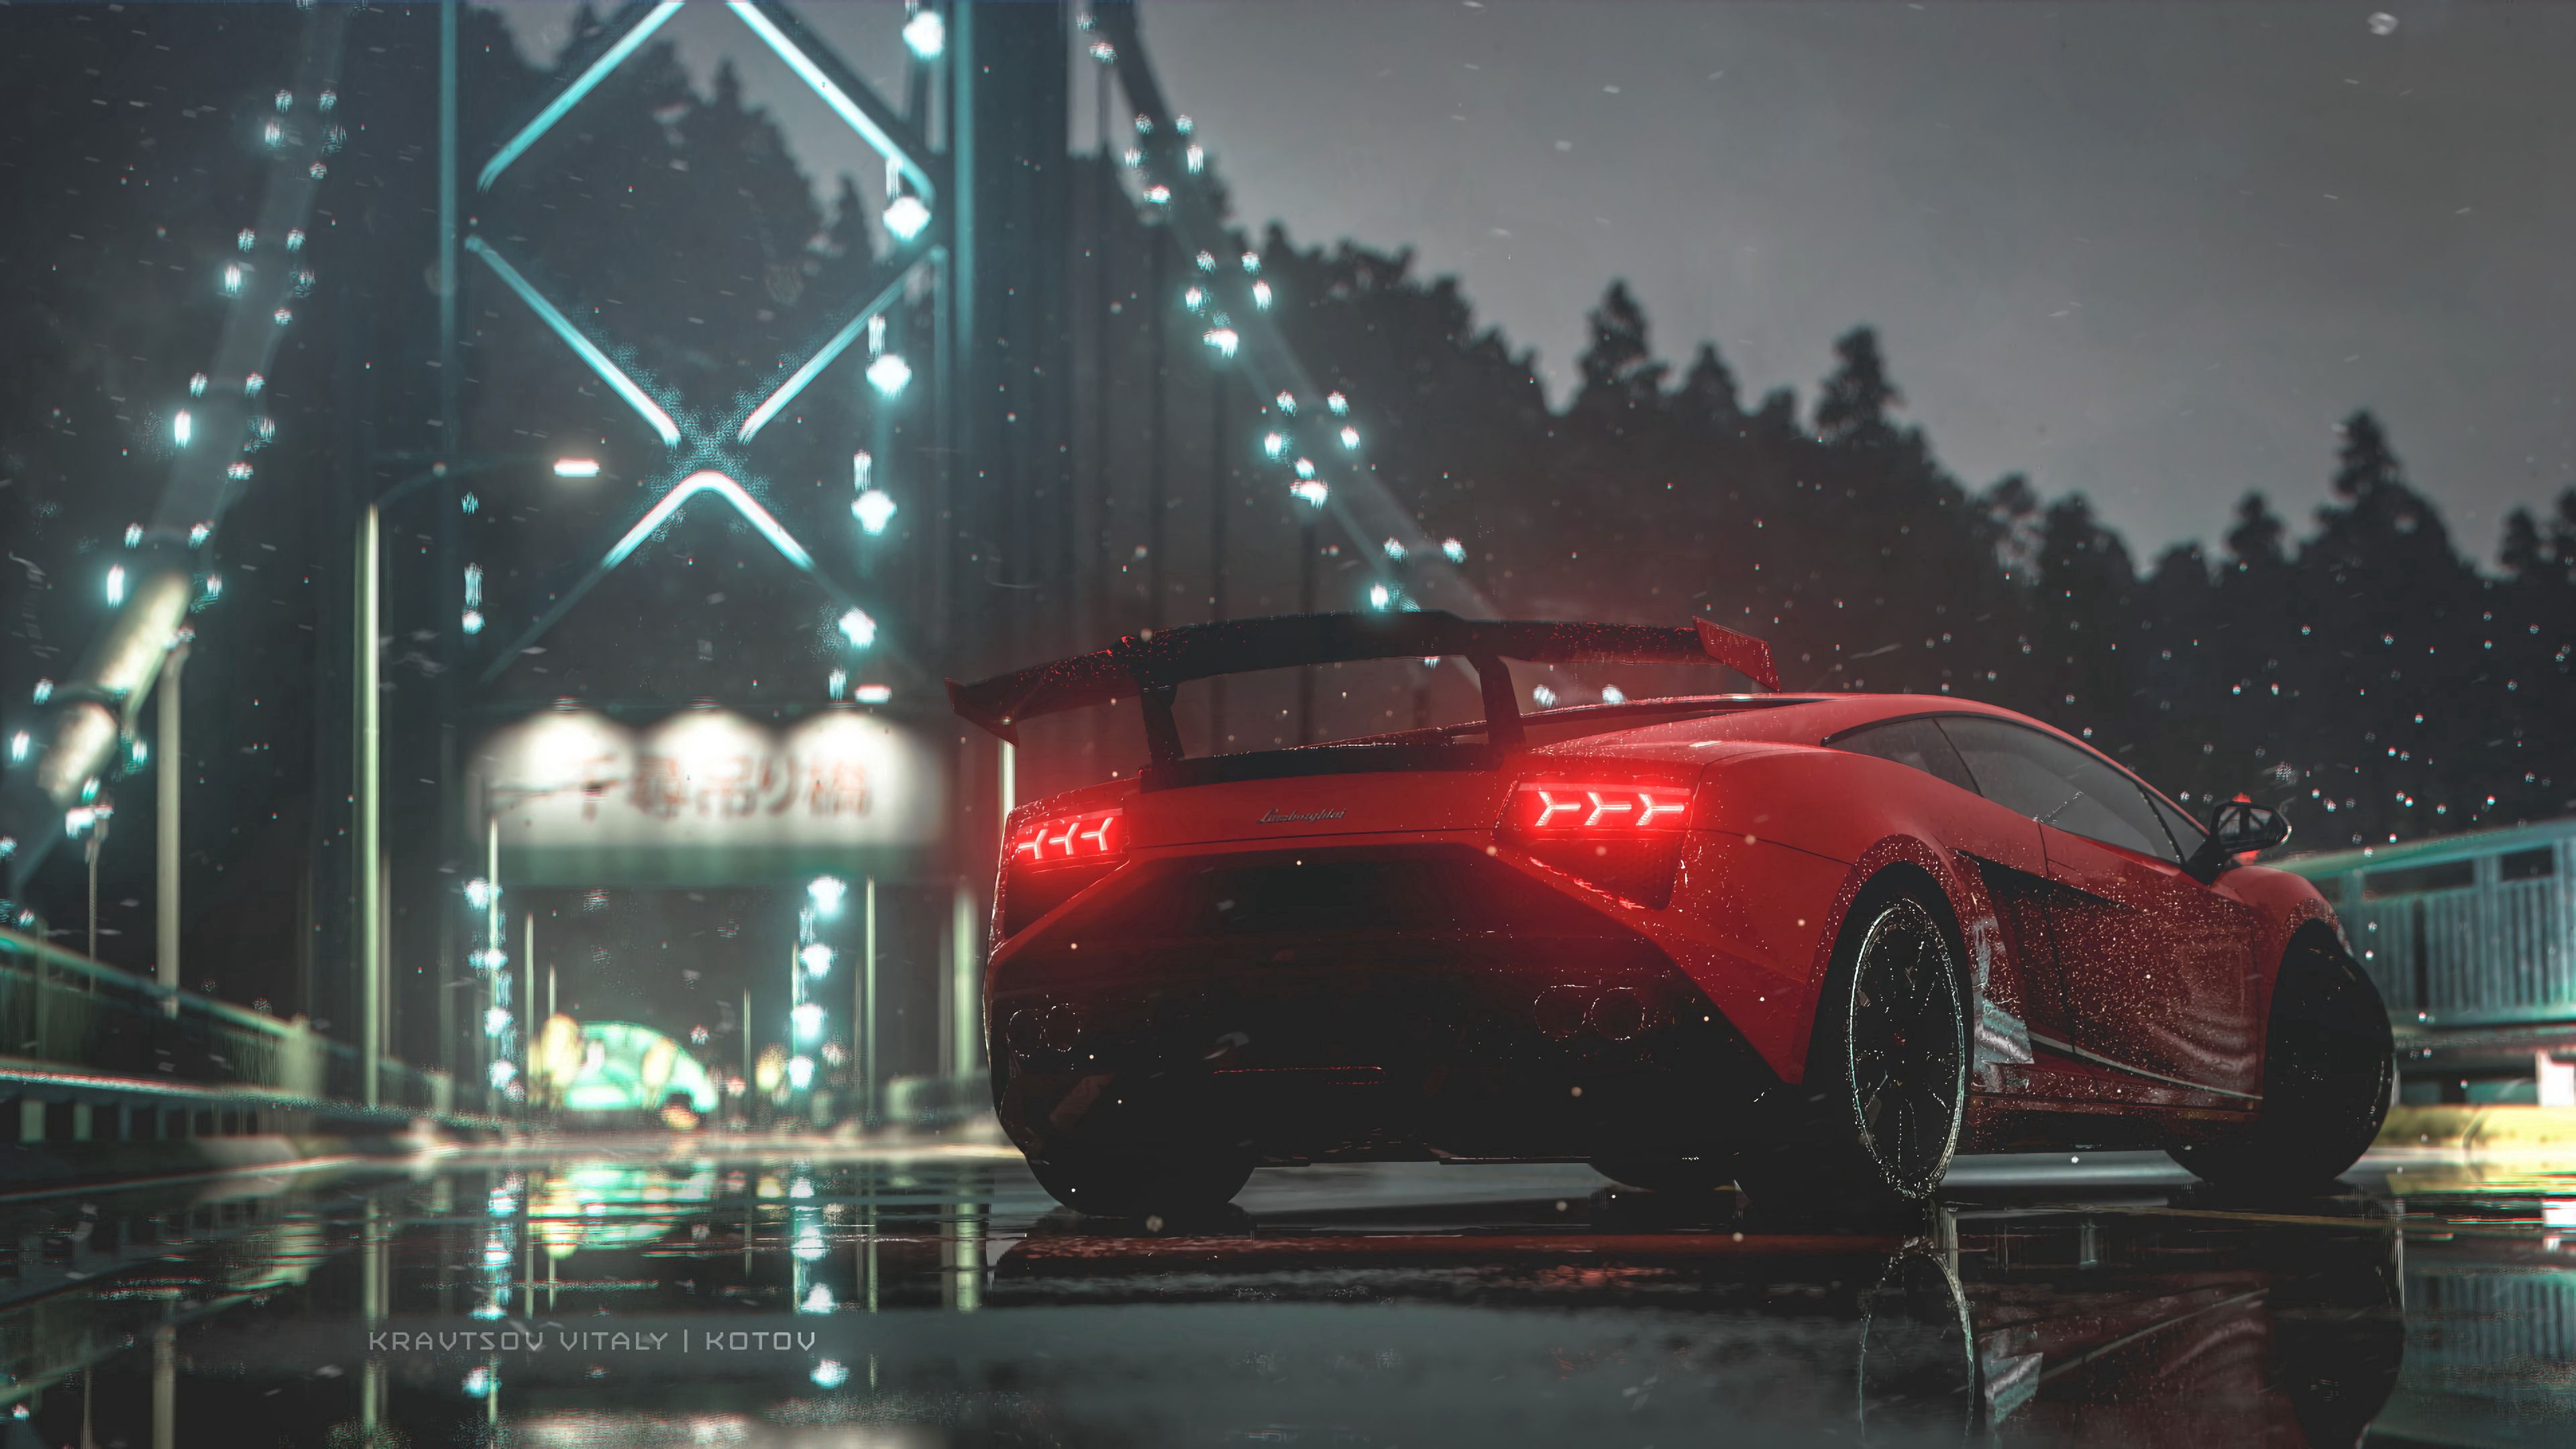 cars, side view, illumination, sports, red, wet, car, machine, backlight, sports car